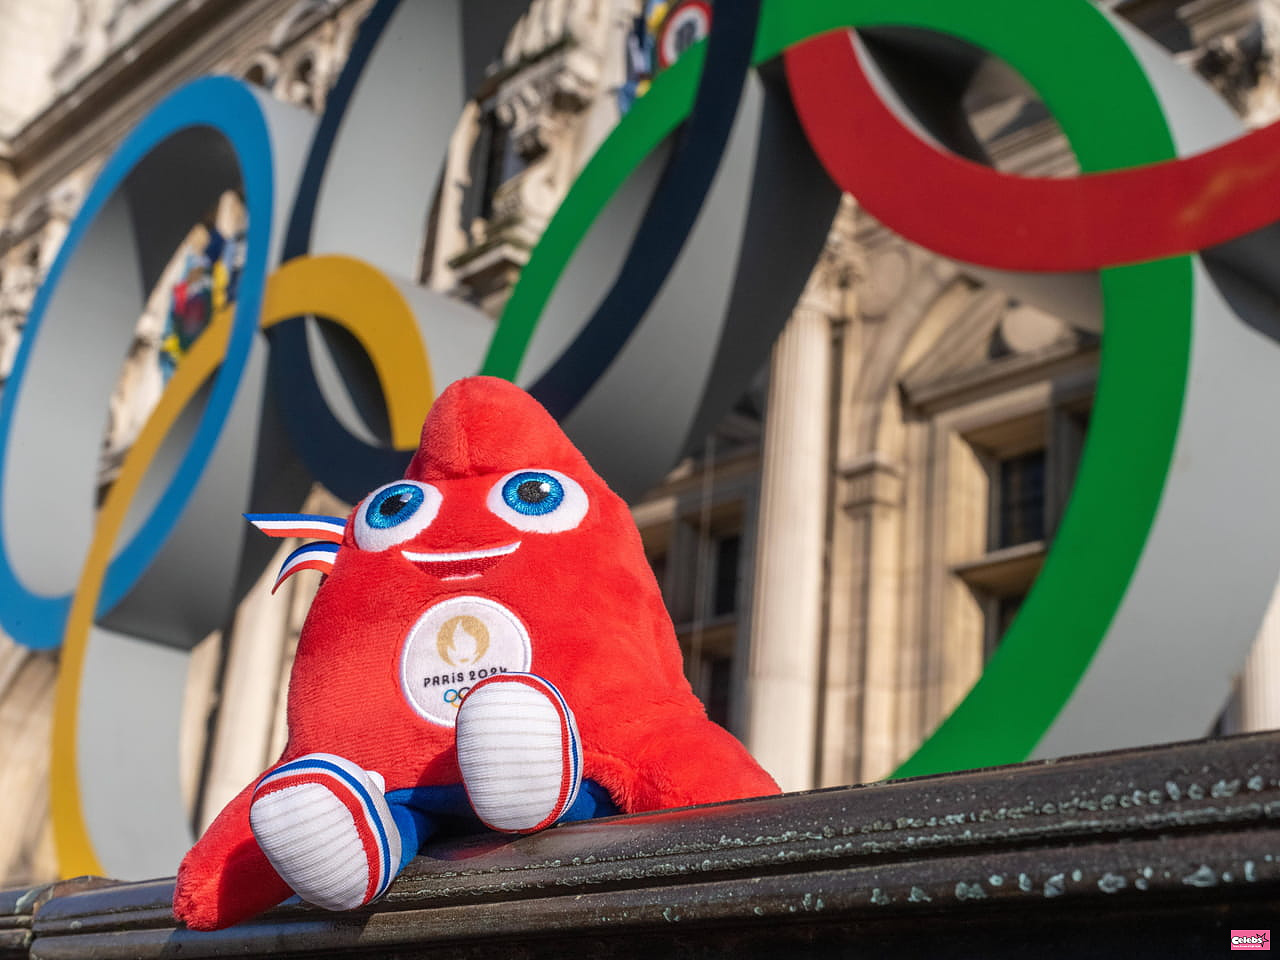 More than half of French people don't like the Olympic mascot, according to a survey